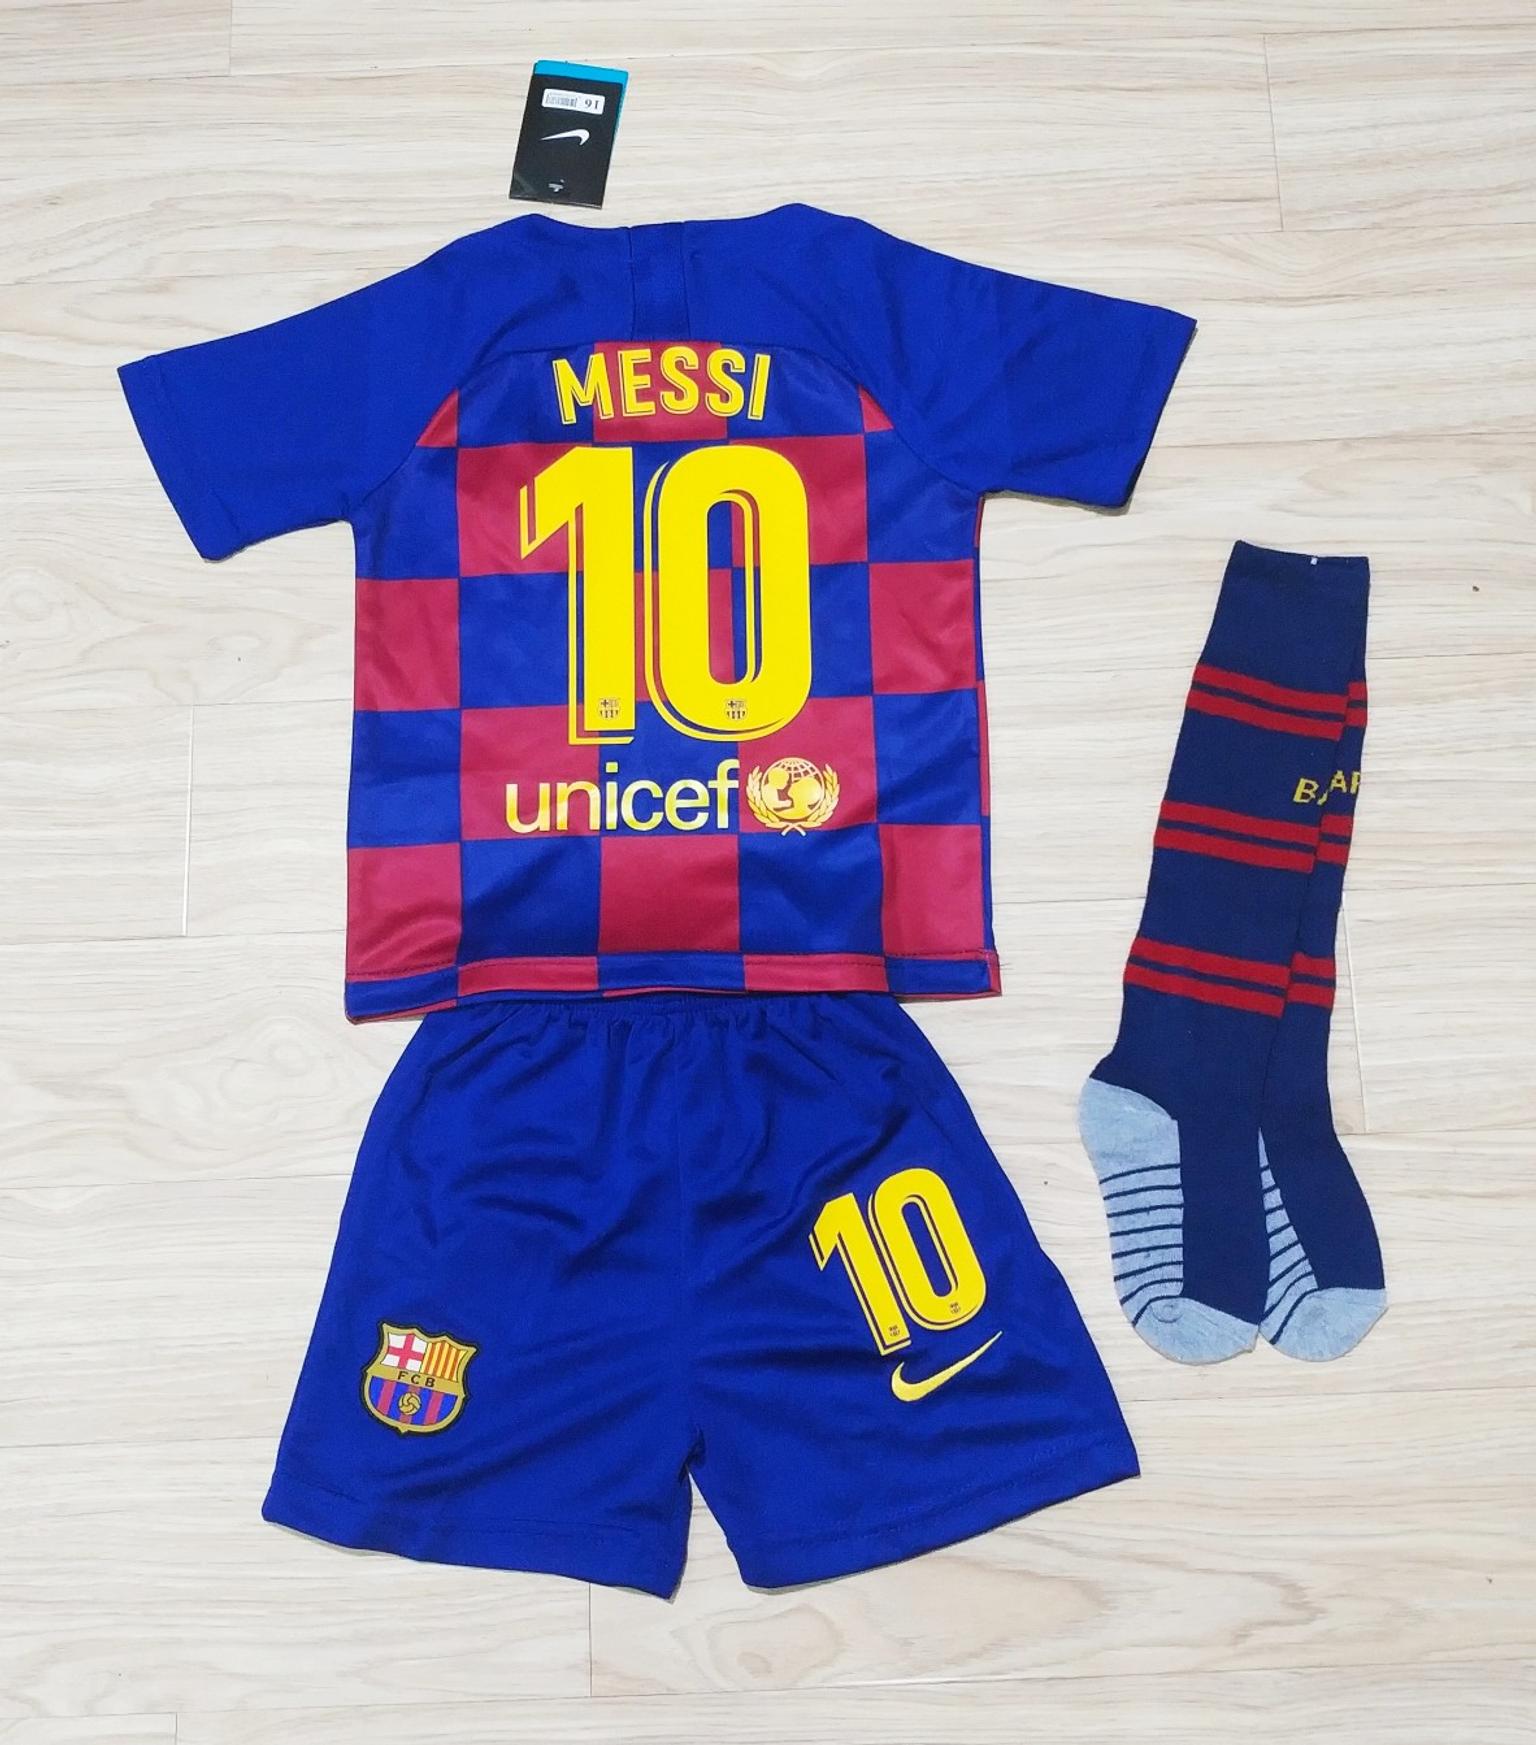 messi jersey for kid